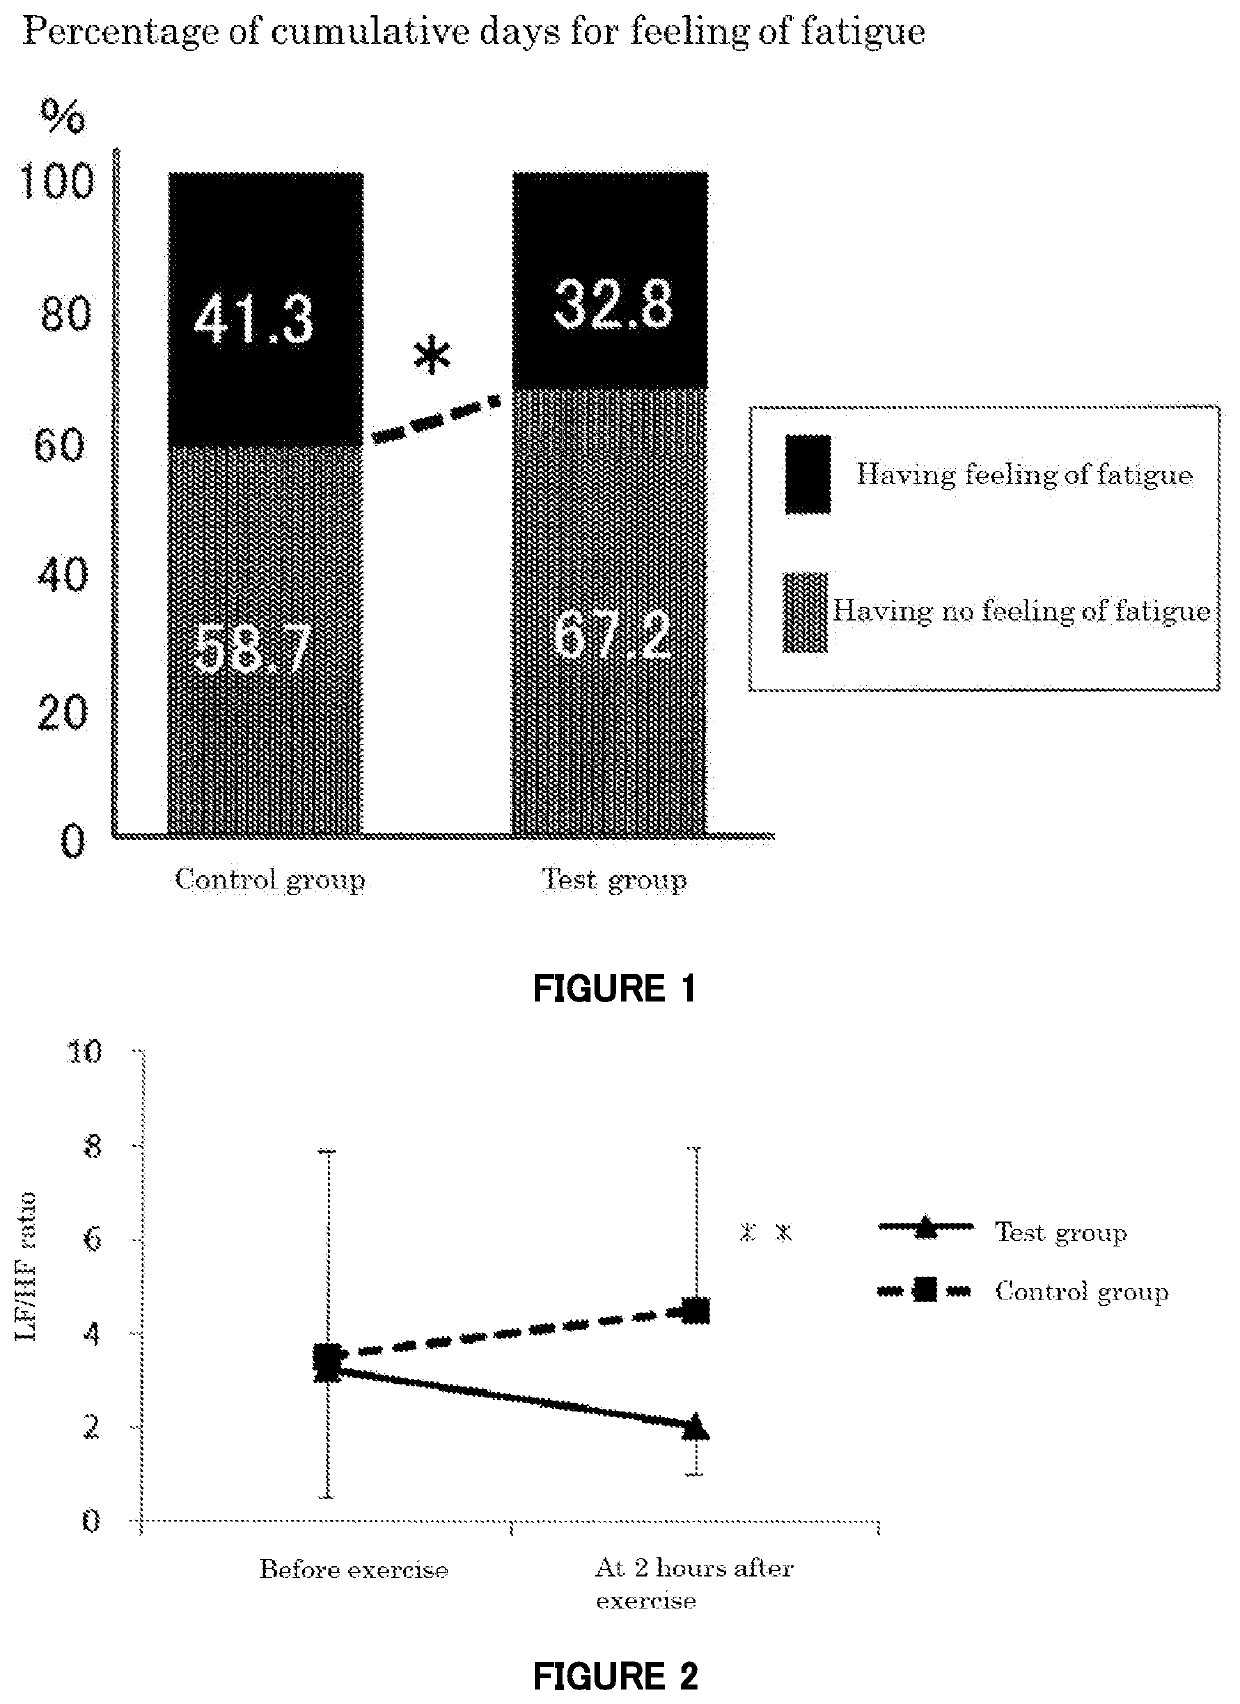 Composition for recovering from fatigue and/or preventing fatigue accumulation